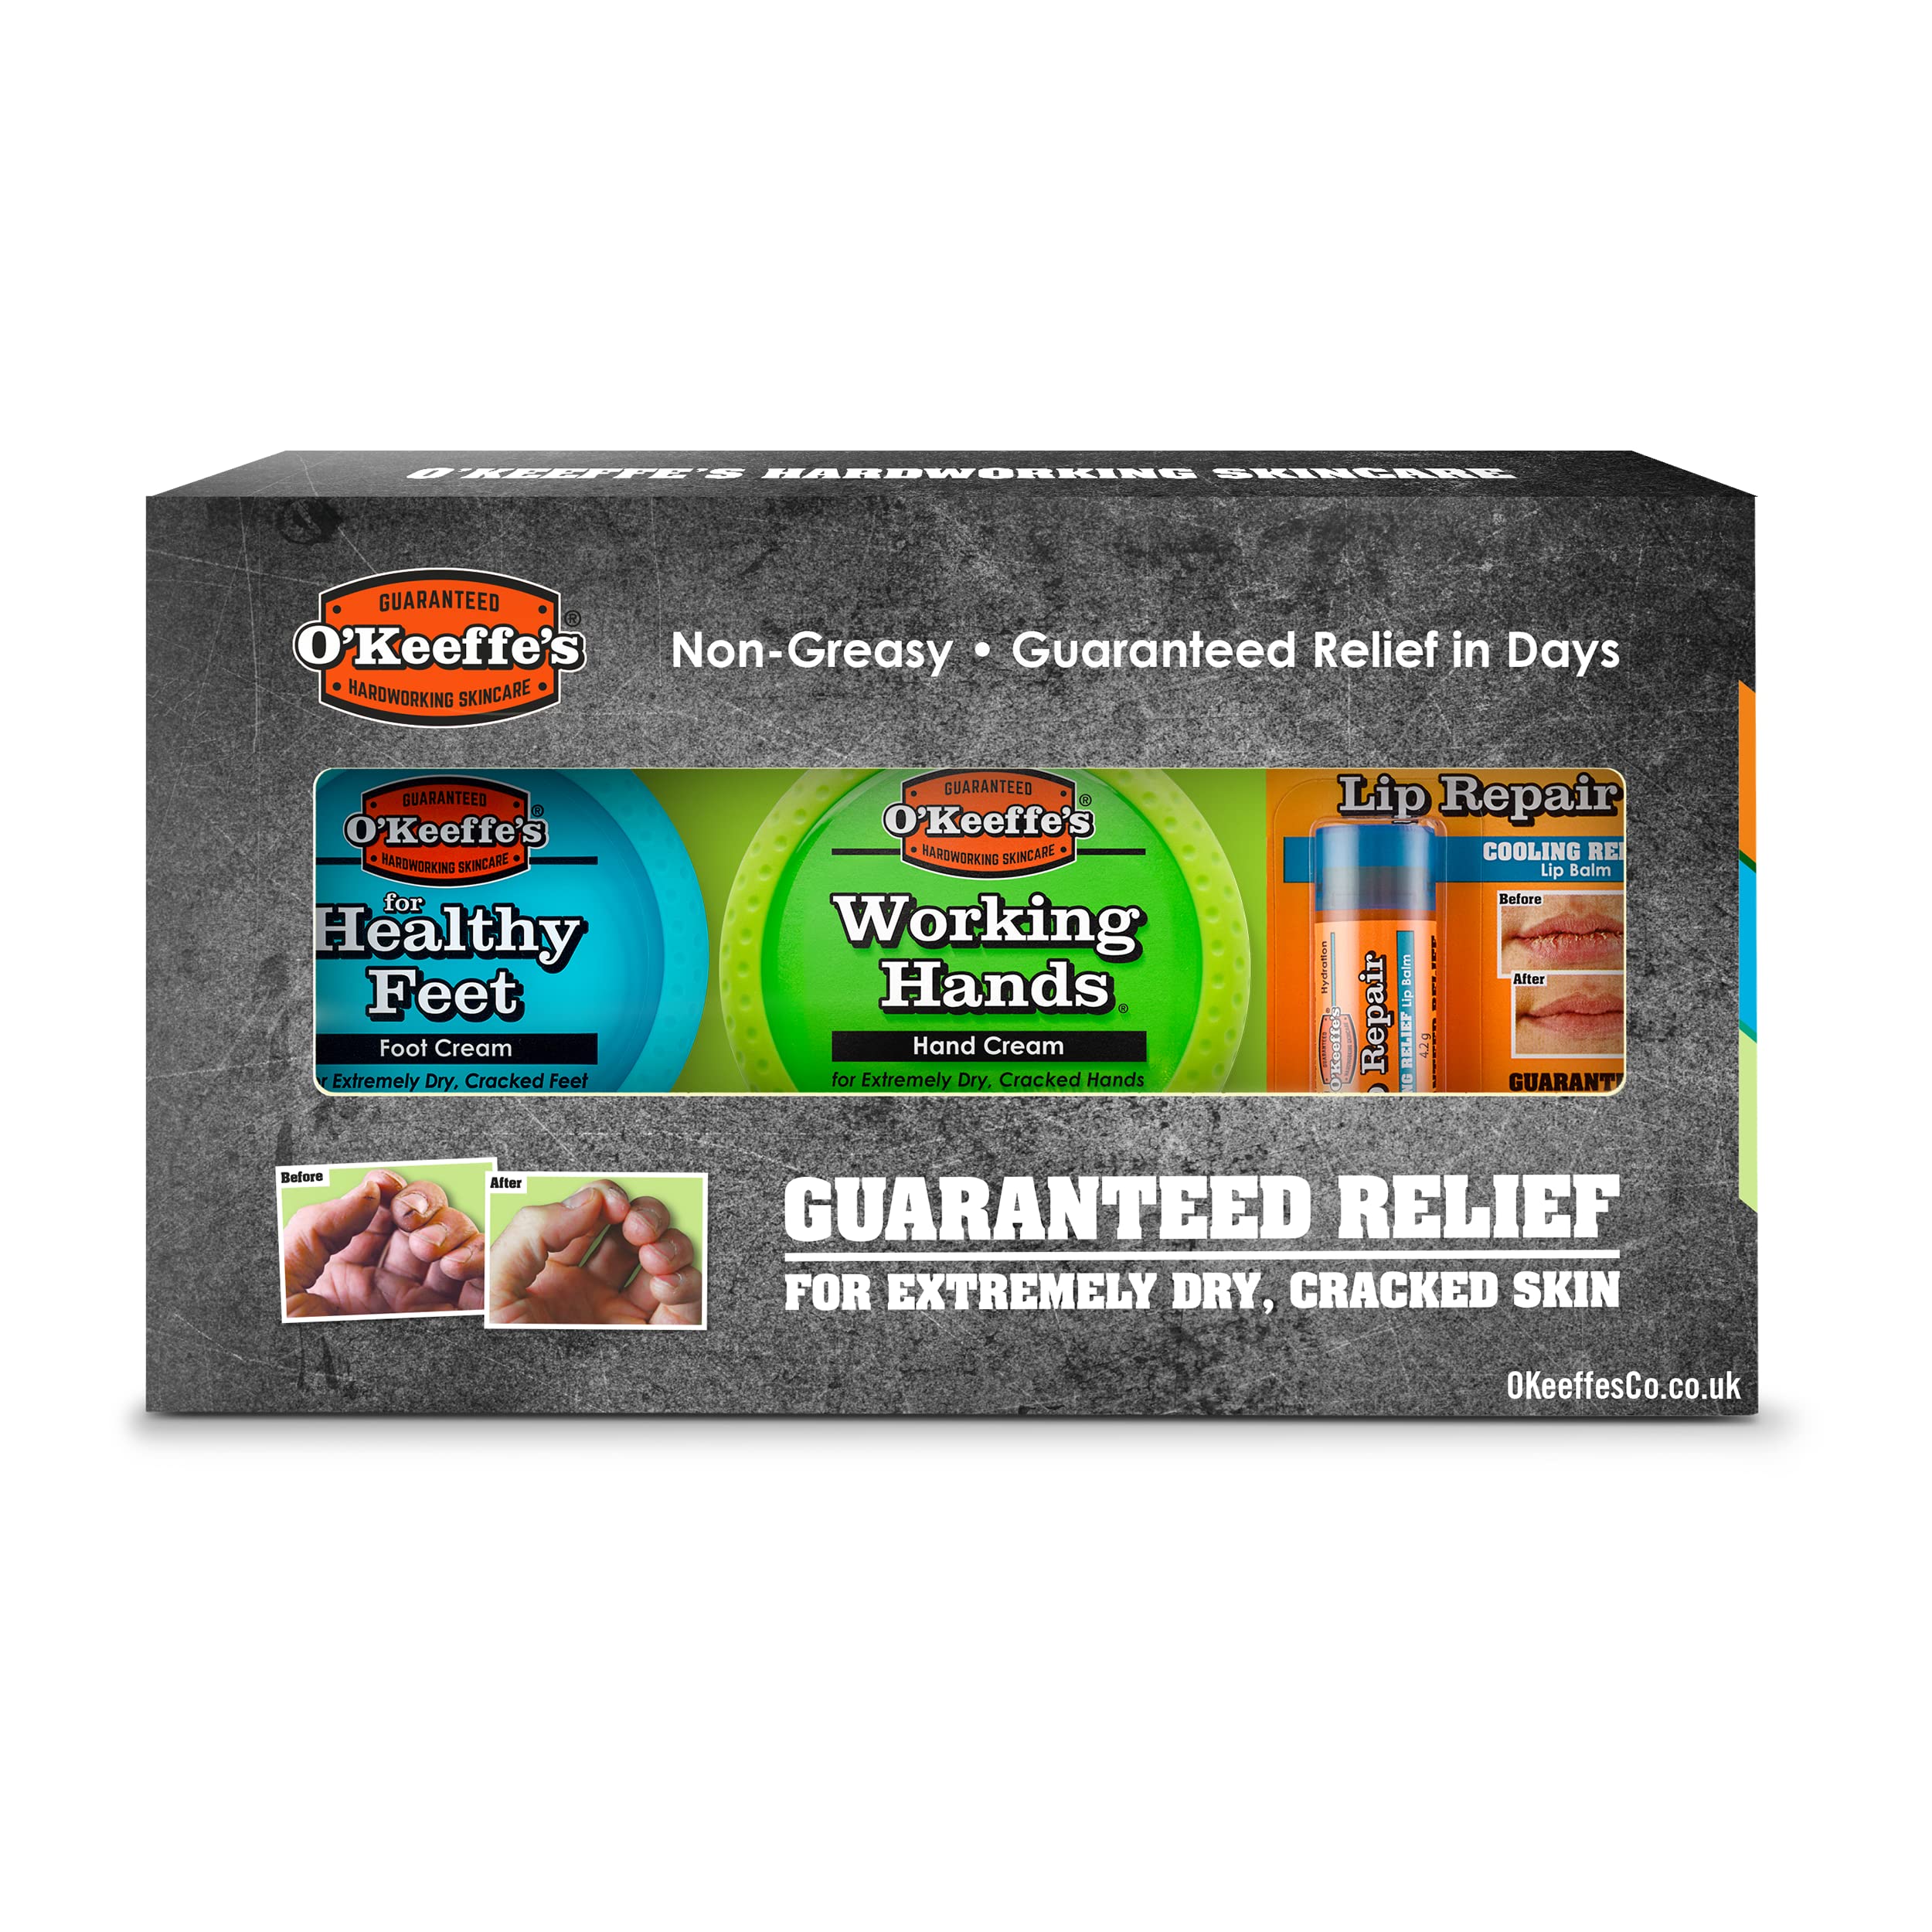 O’Keeffe’s Skincare Giftpack - Working Hands 96g, Healthy Feet 91g and Lip Repair 4.2g